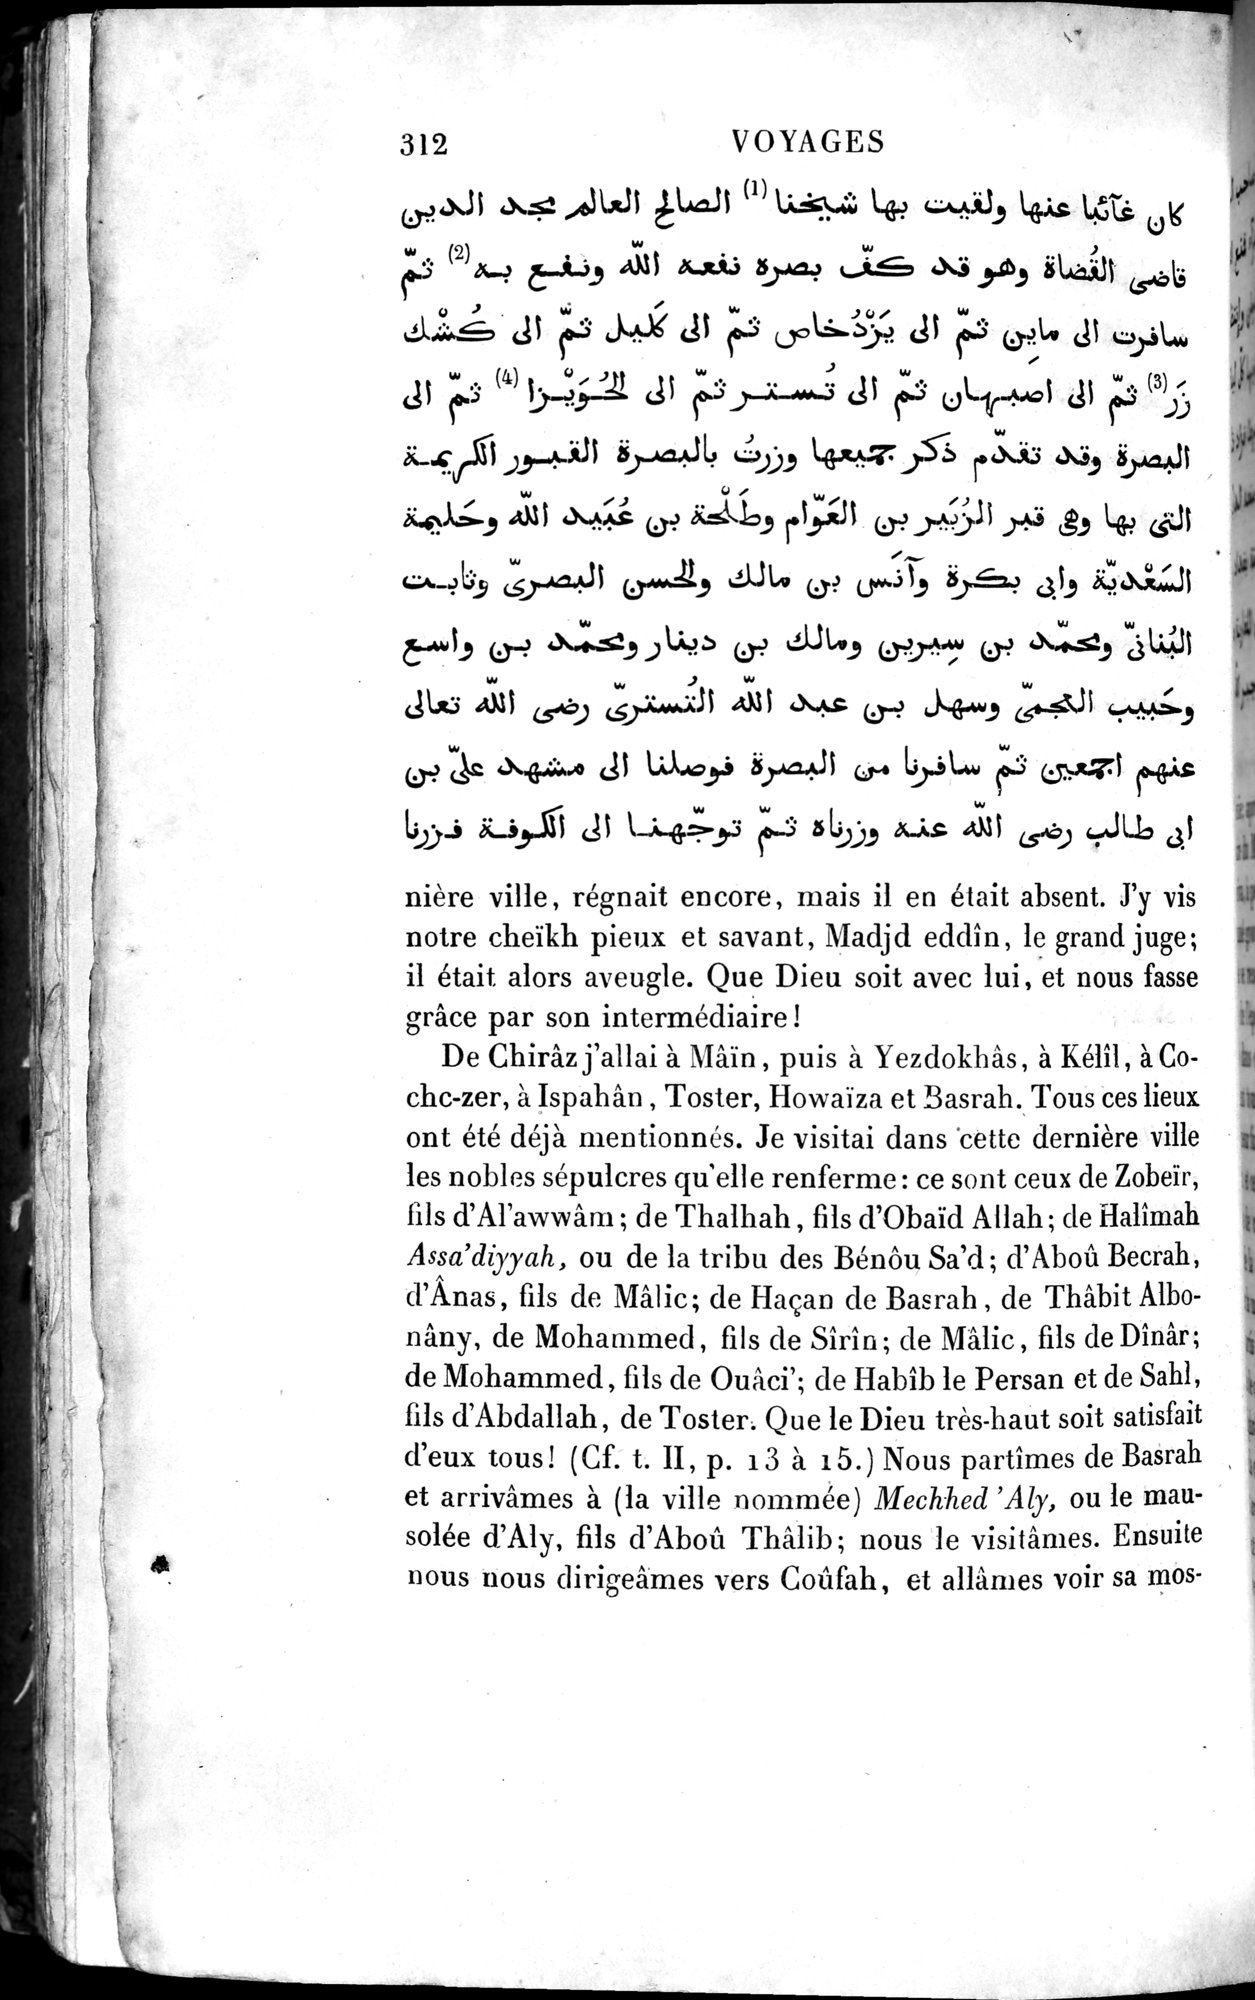 Voyages d'Ibn Batoutah : vol.4 / Page 324 (Grayscale High Resolution Image)